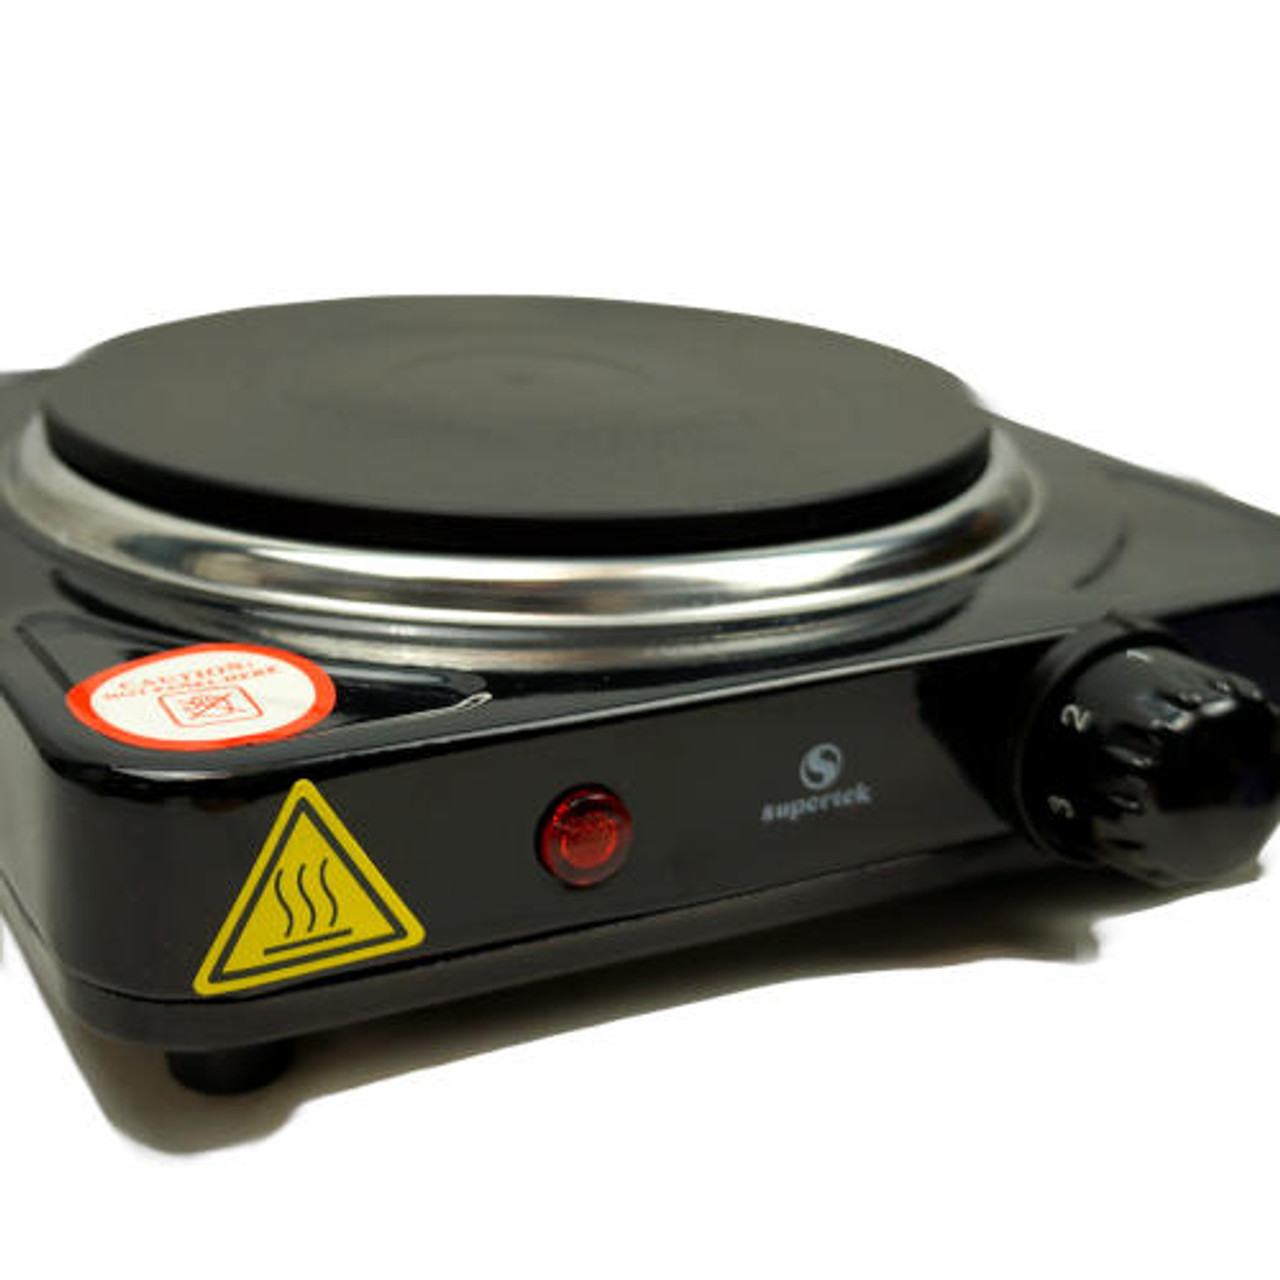 Portable 1000W Multi-function Electric Stove Cooking Solid Electric Stove  Top for Office,on The Go